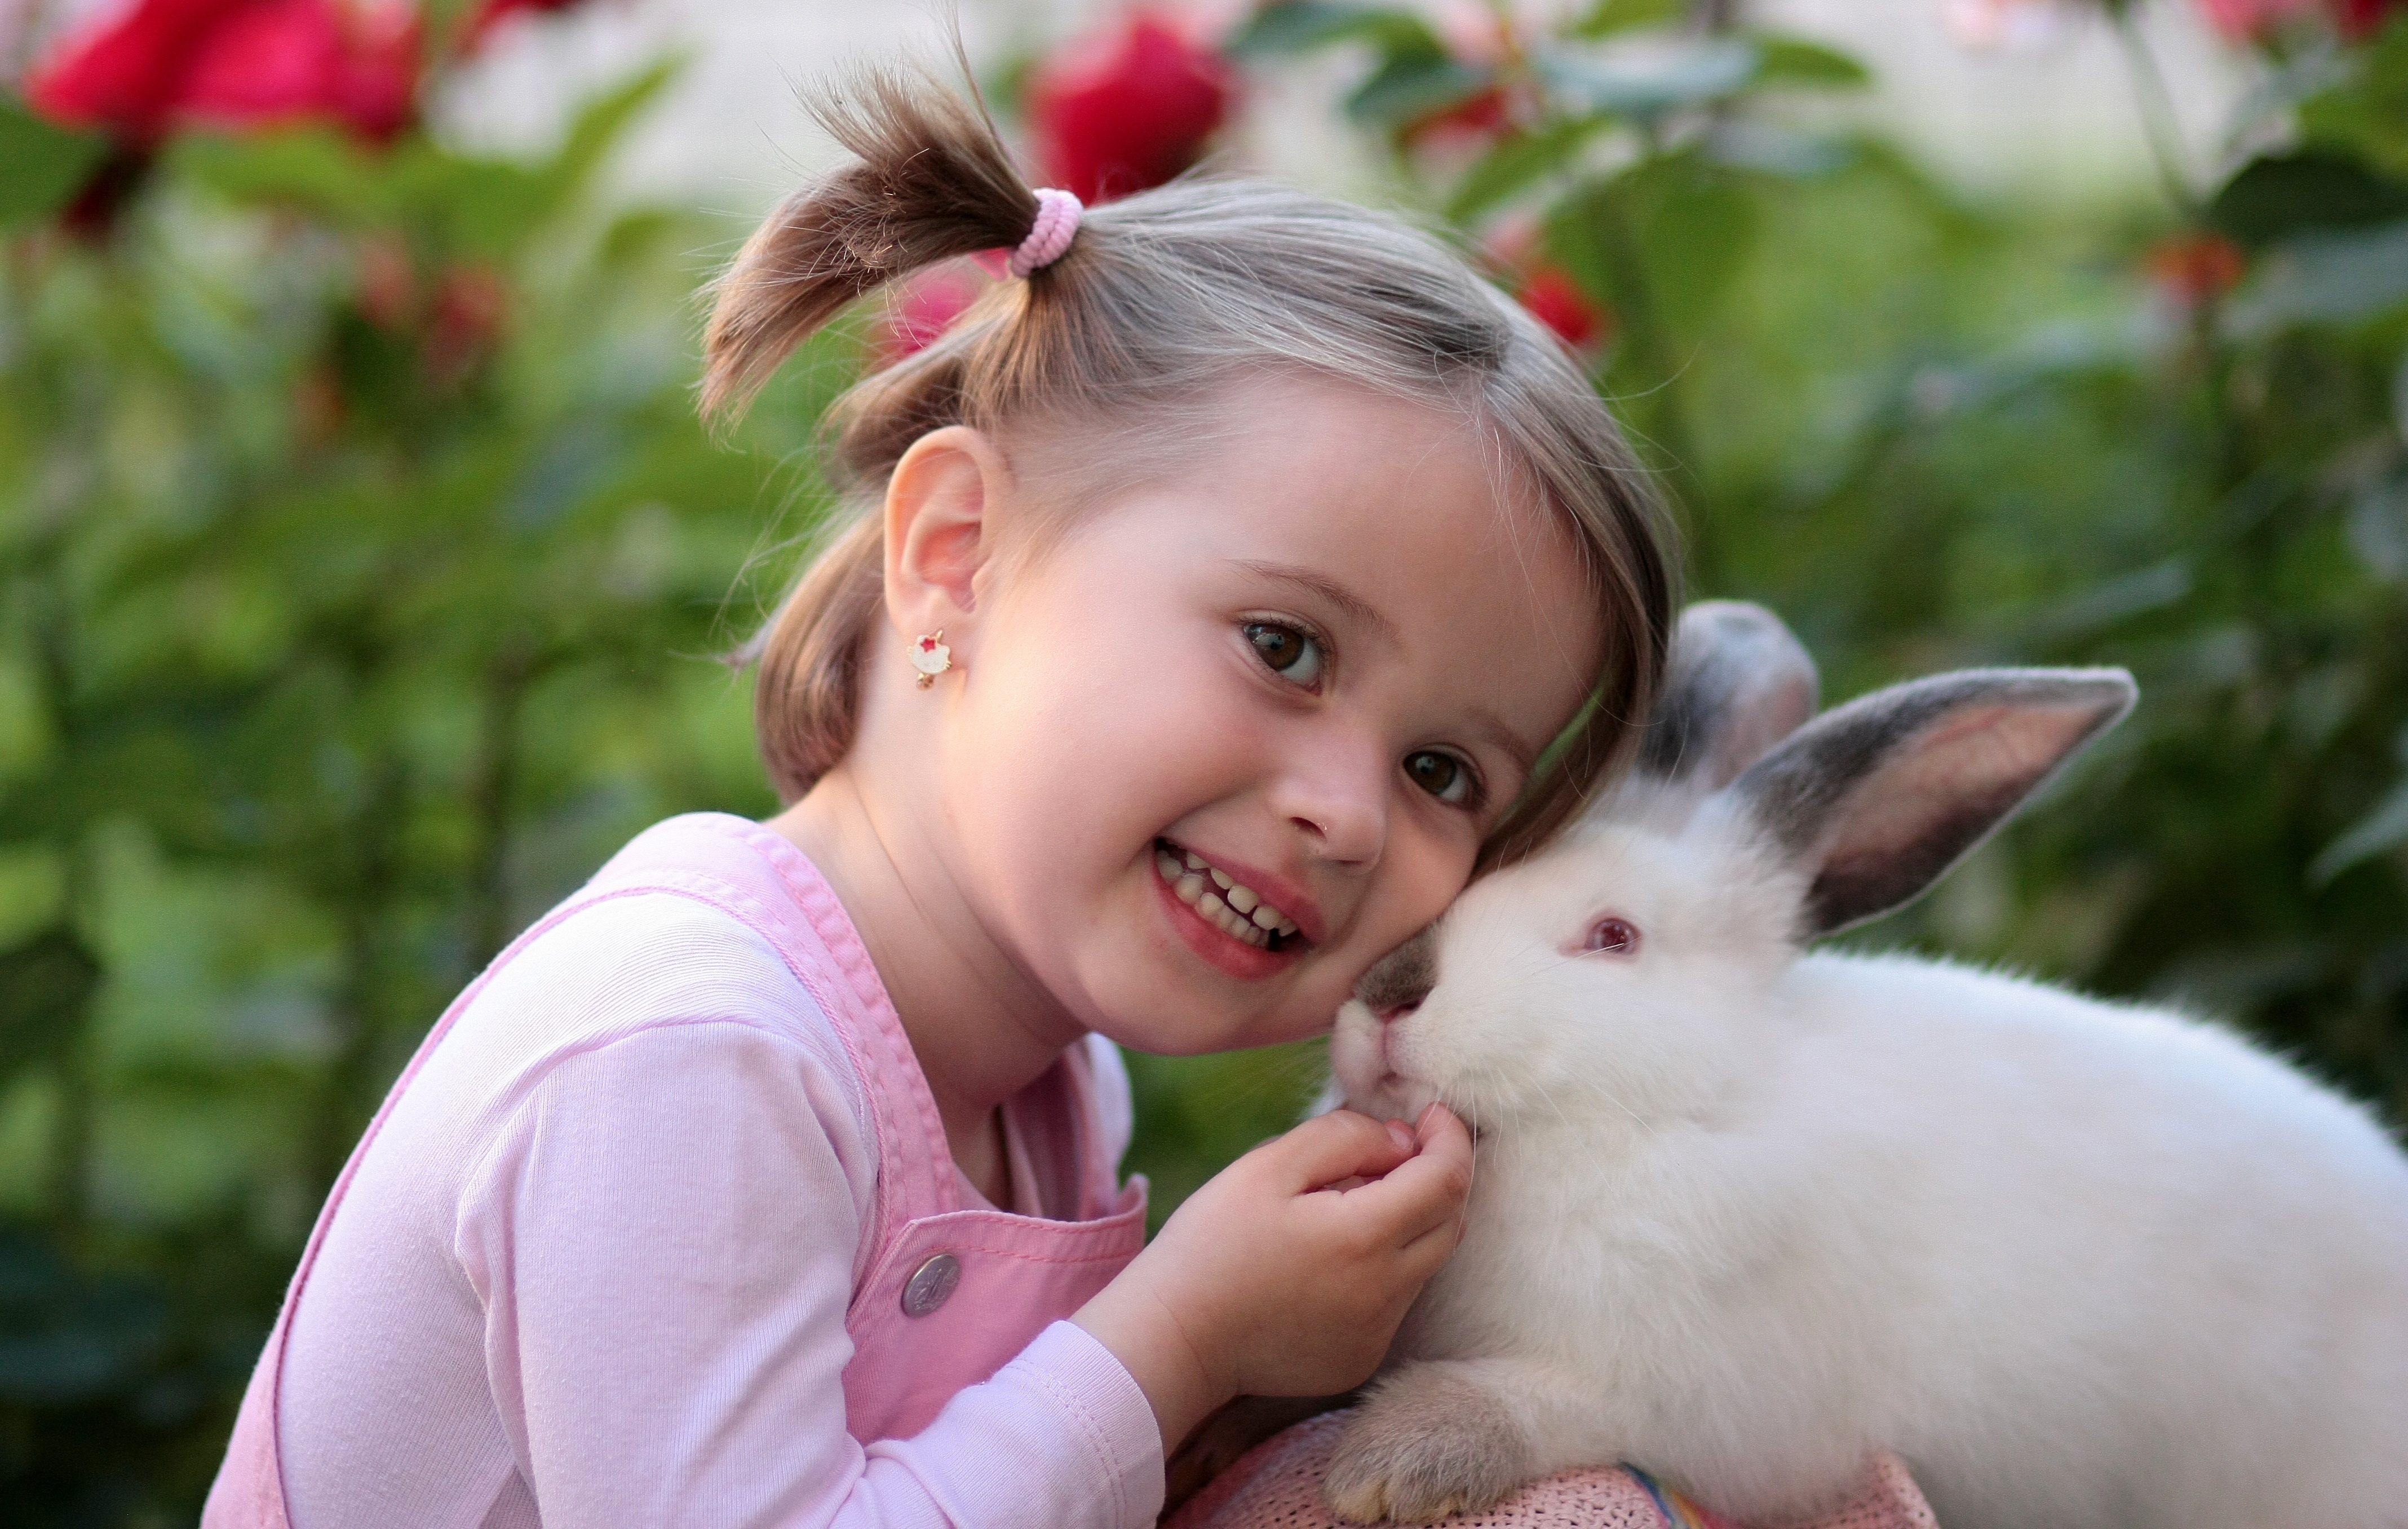 Girl playing with a rabbit in nature